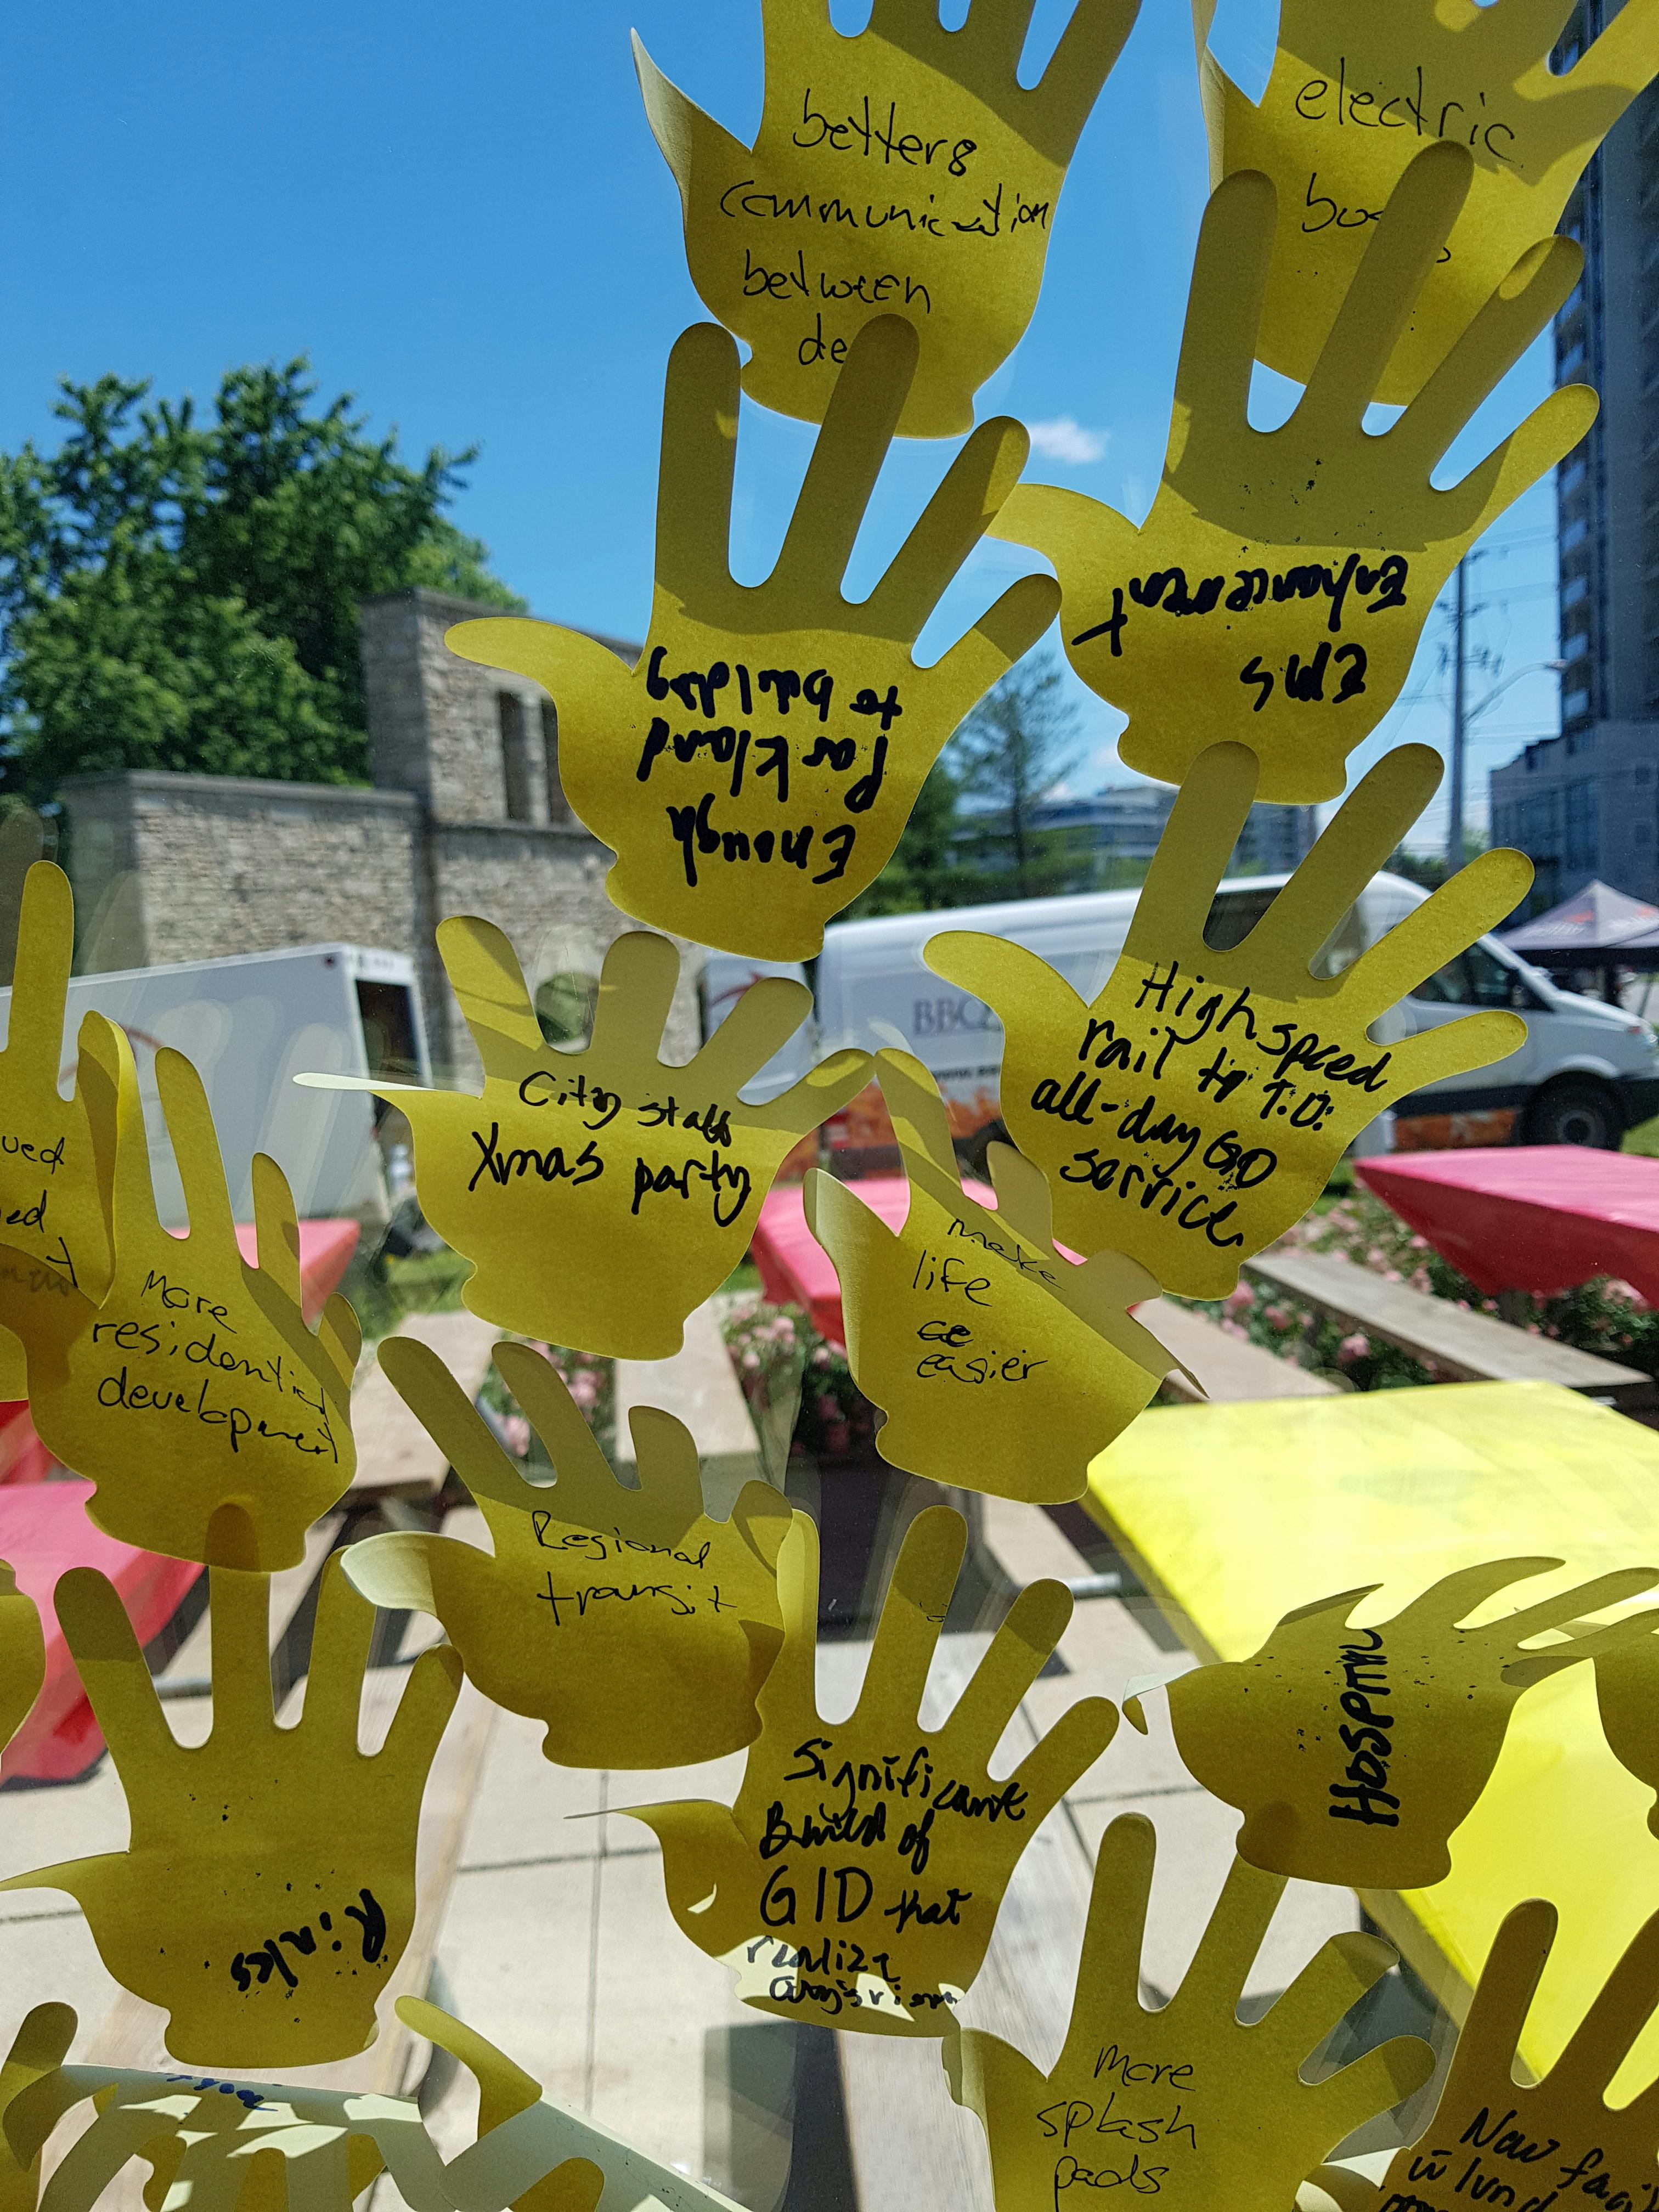 City staff BBQ - what's your one wish for Guelph?